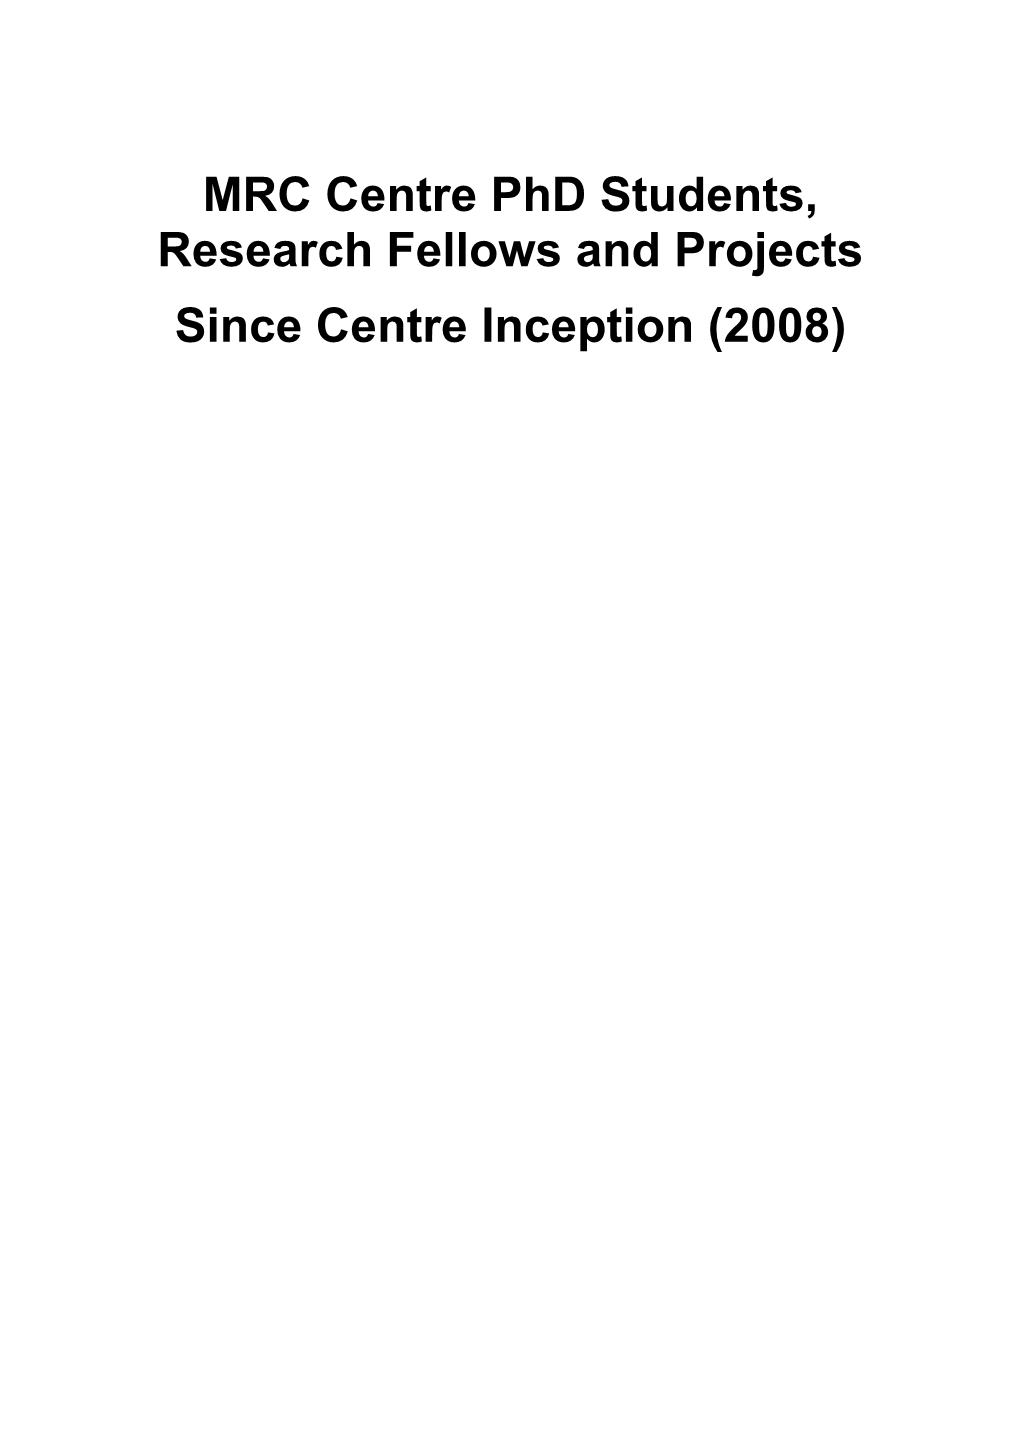 MRC Centre Phd Students, Research Fellows and Projects Since Centre Inception (2008)